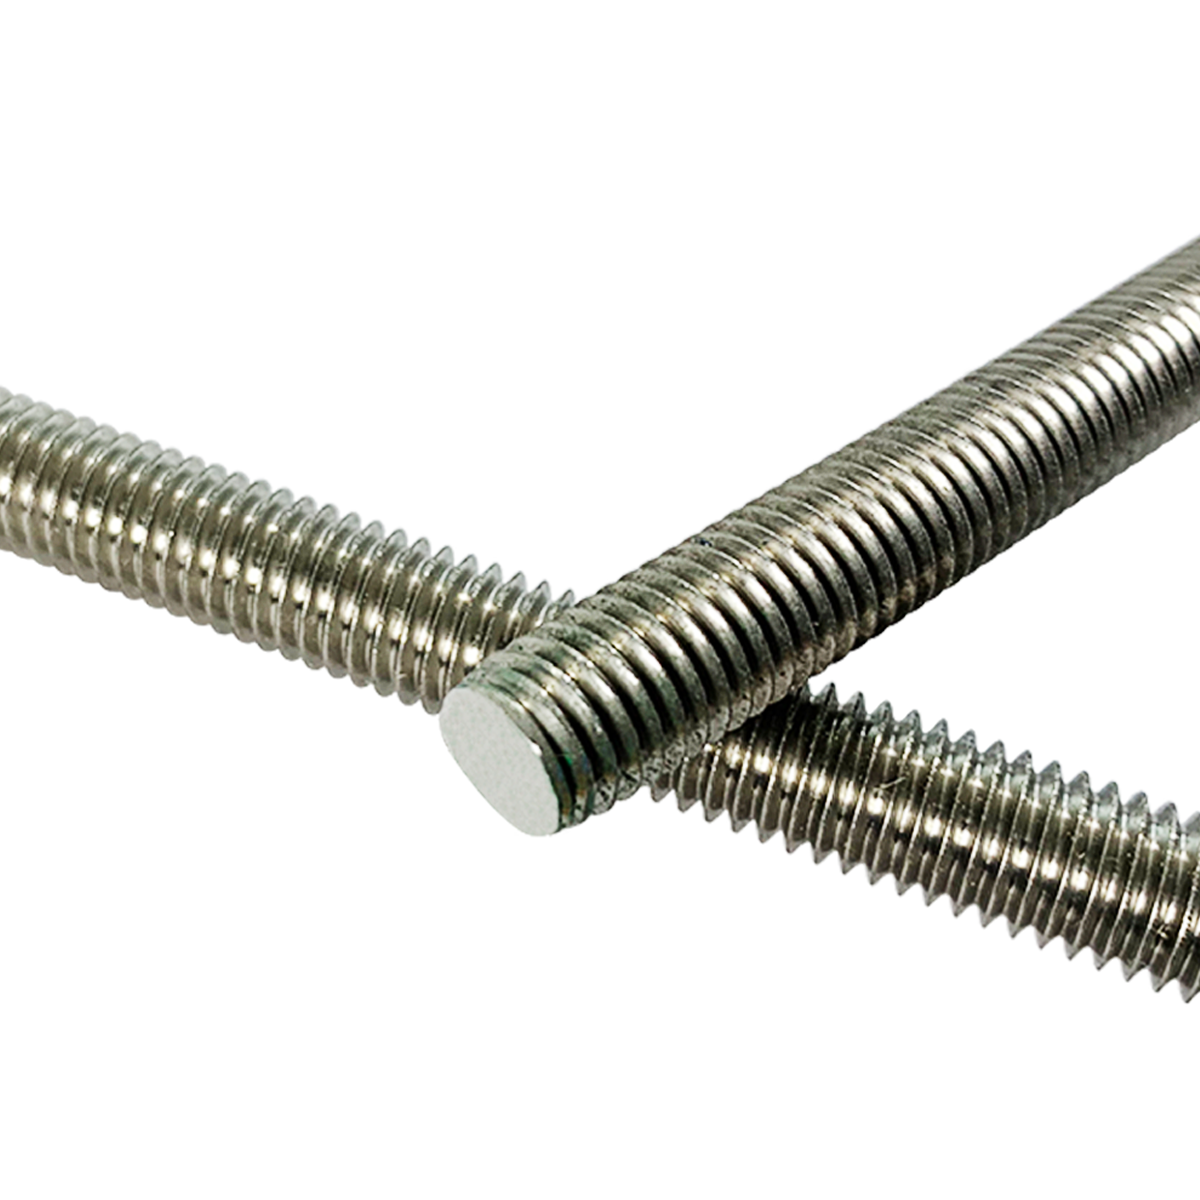 Threaded bar, also know as threaded rod or sudding, is available in various materials and at competitive prices at Fusion Fixings